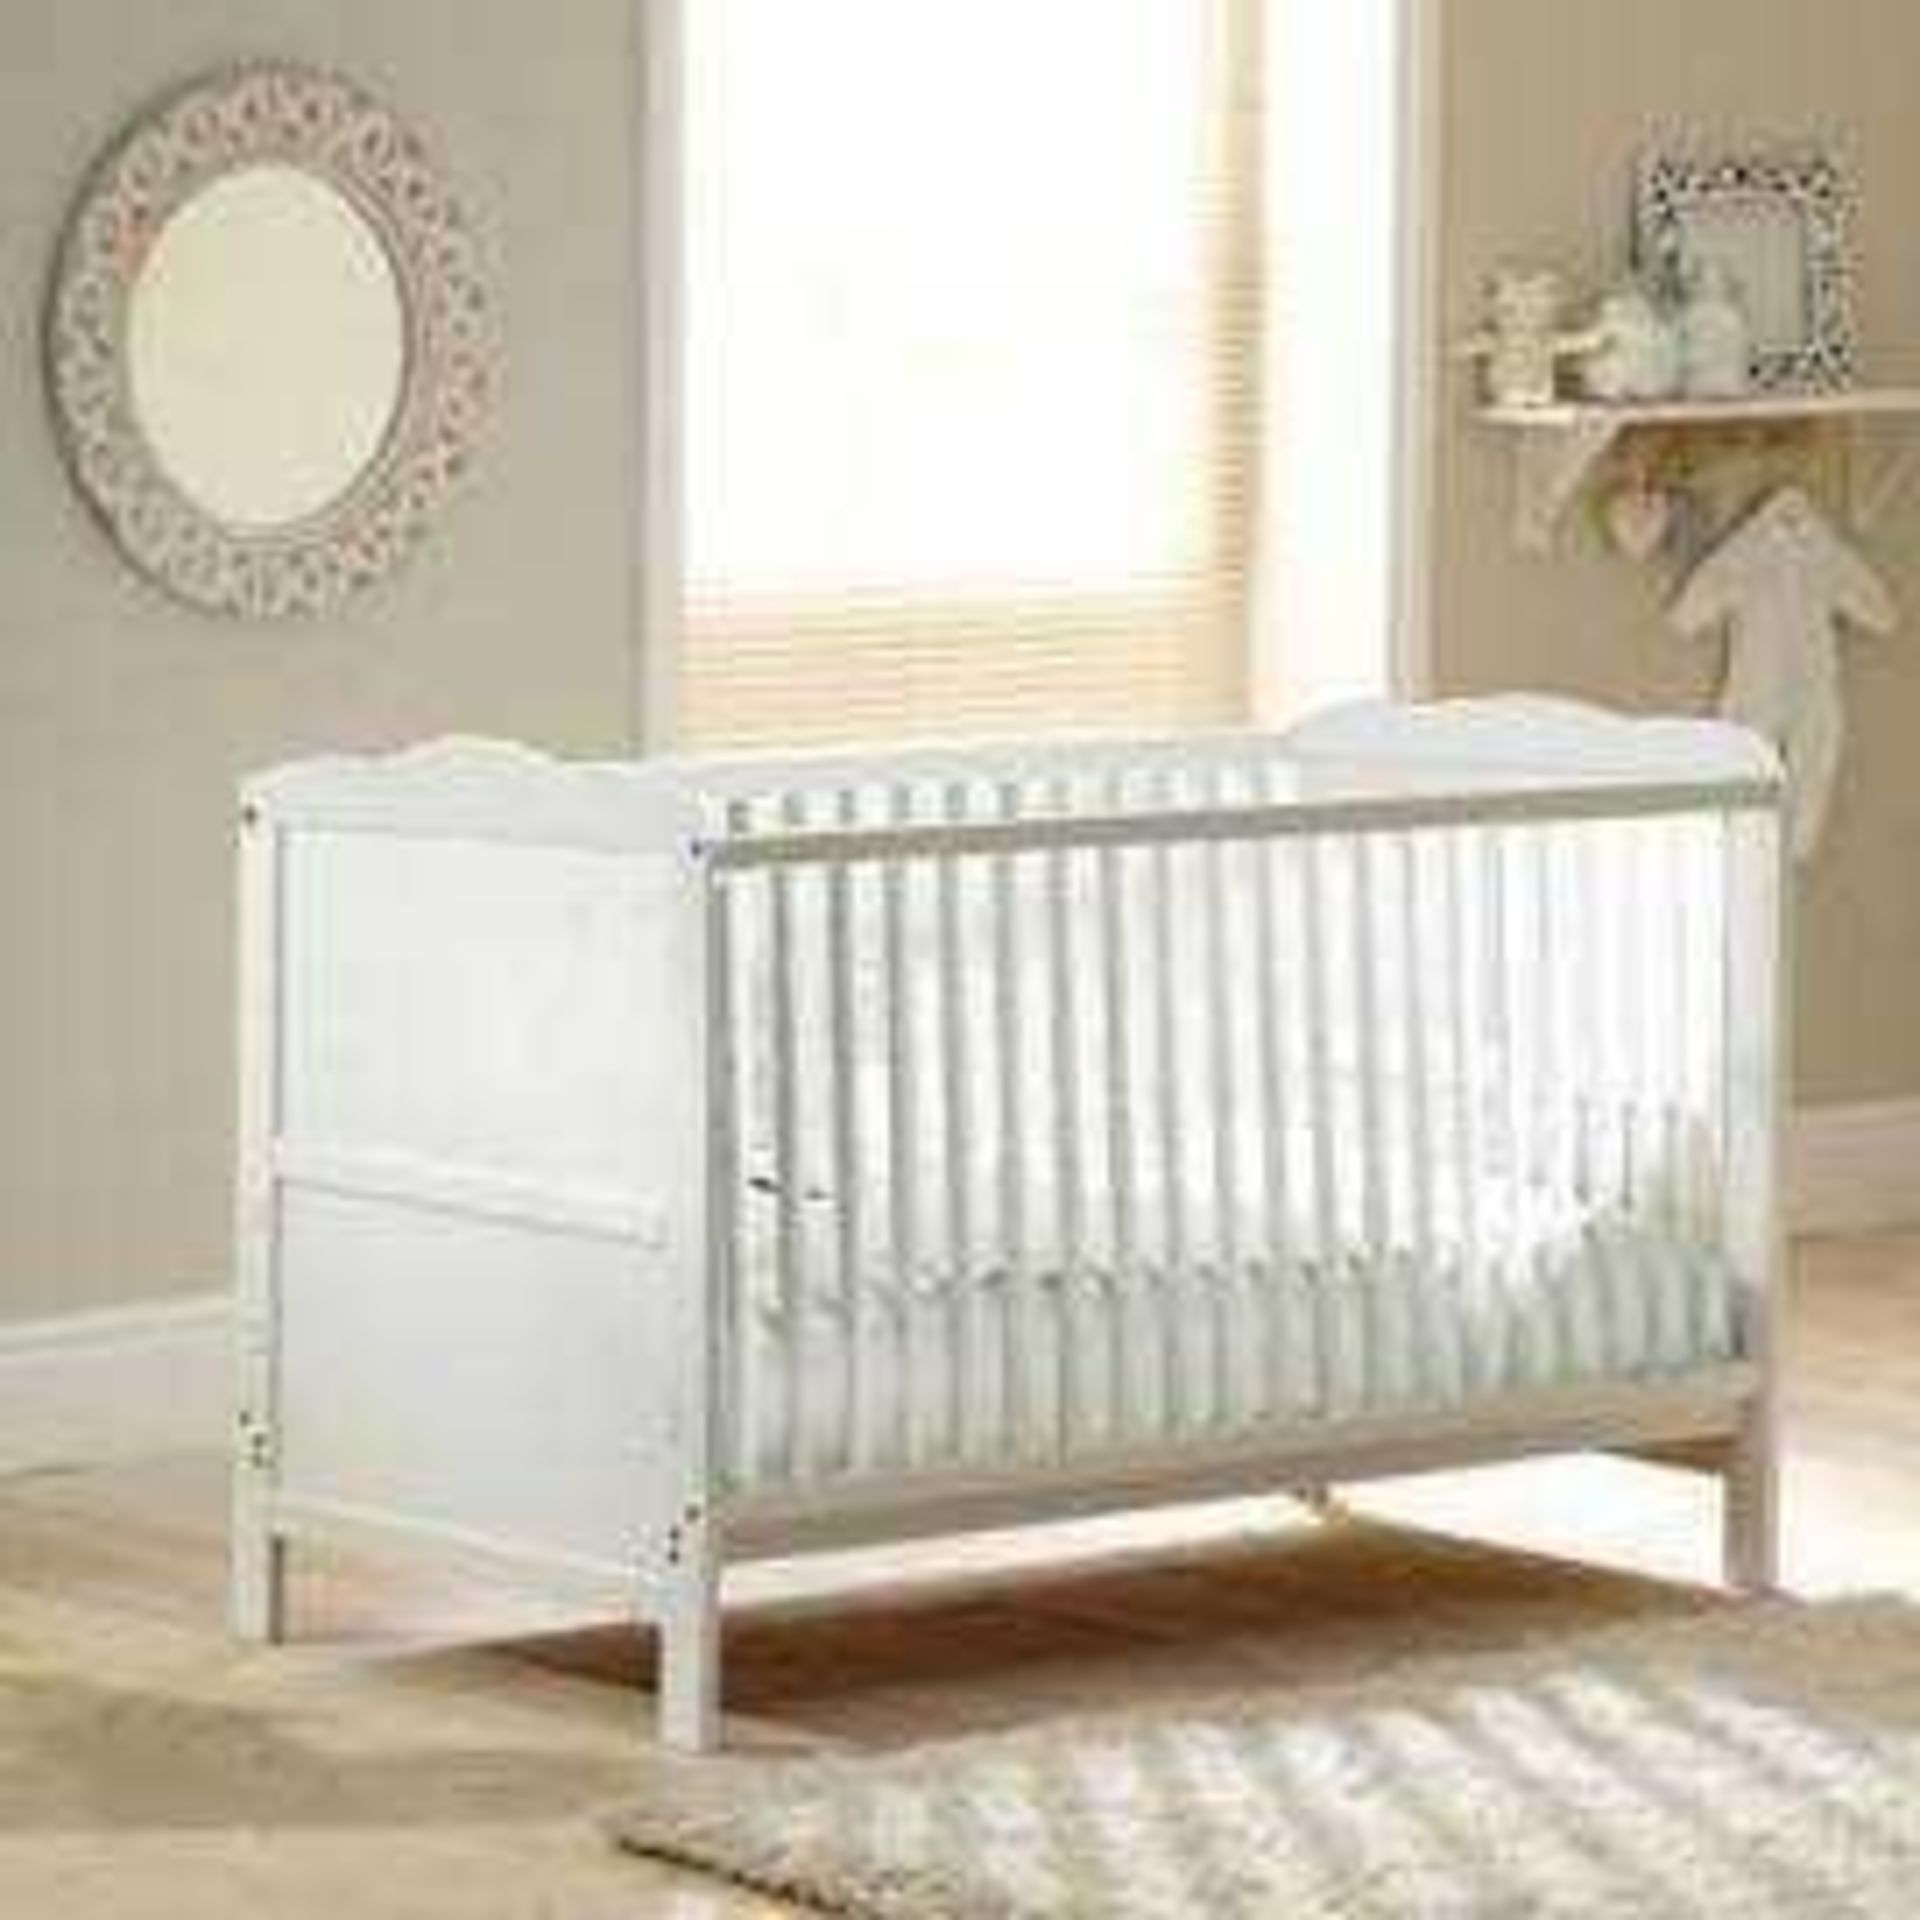 RRP £100 Boxed 4 Baby 3In1 Sleigh Cot Bed In White (Appraisals Are Available On Request) (Pictures